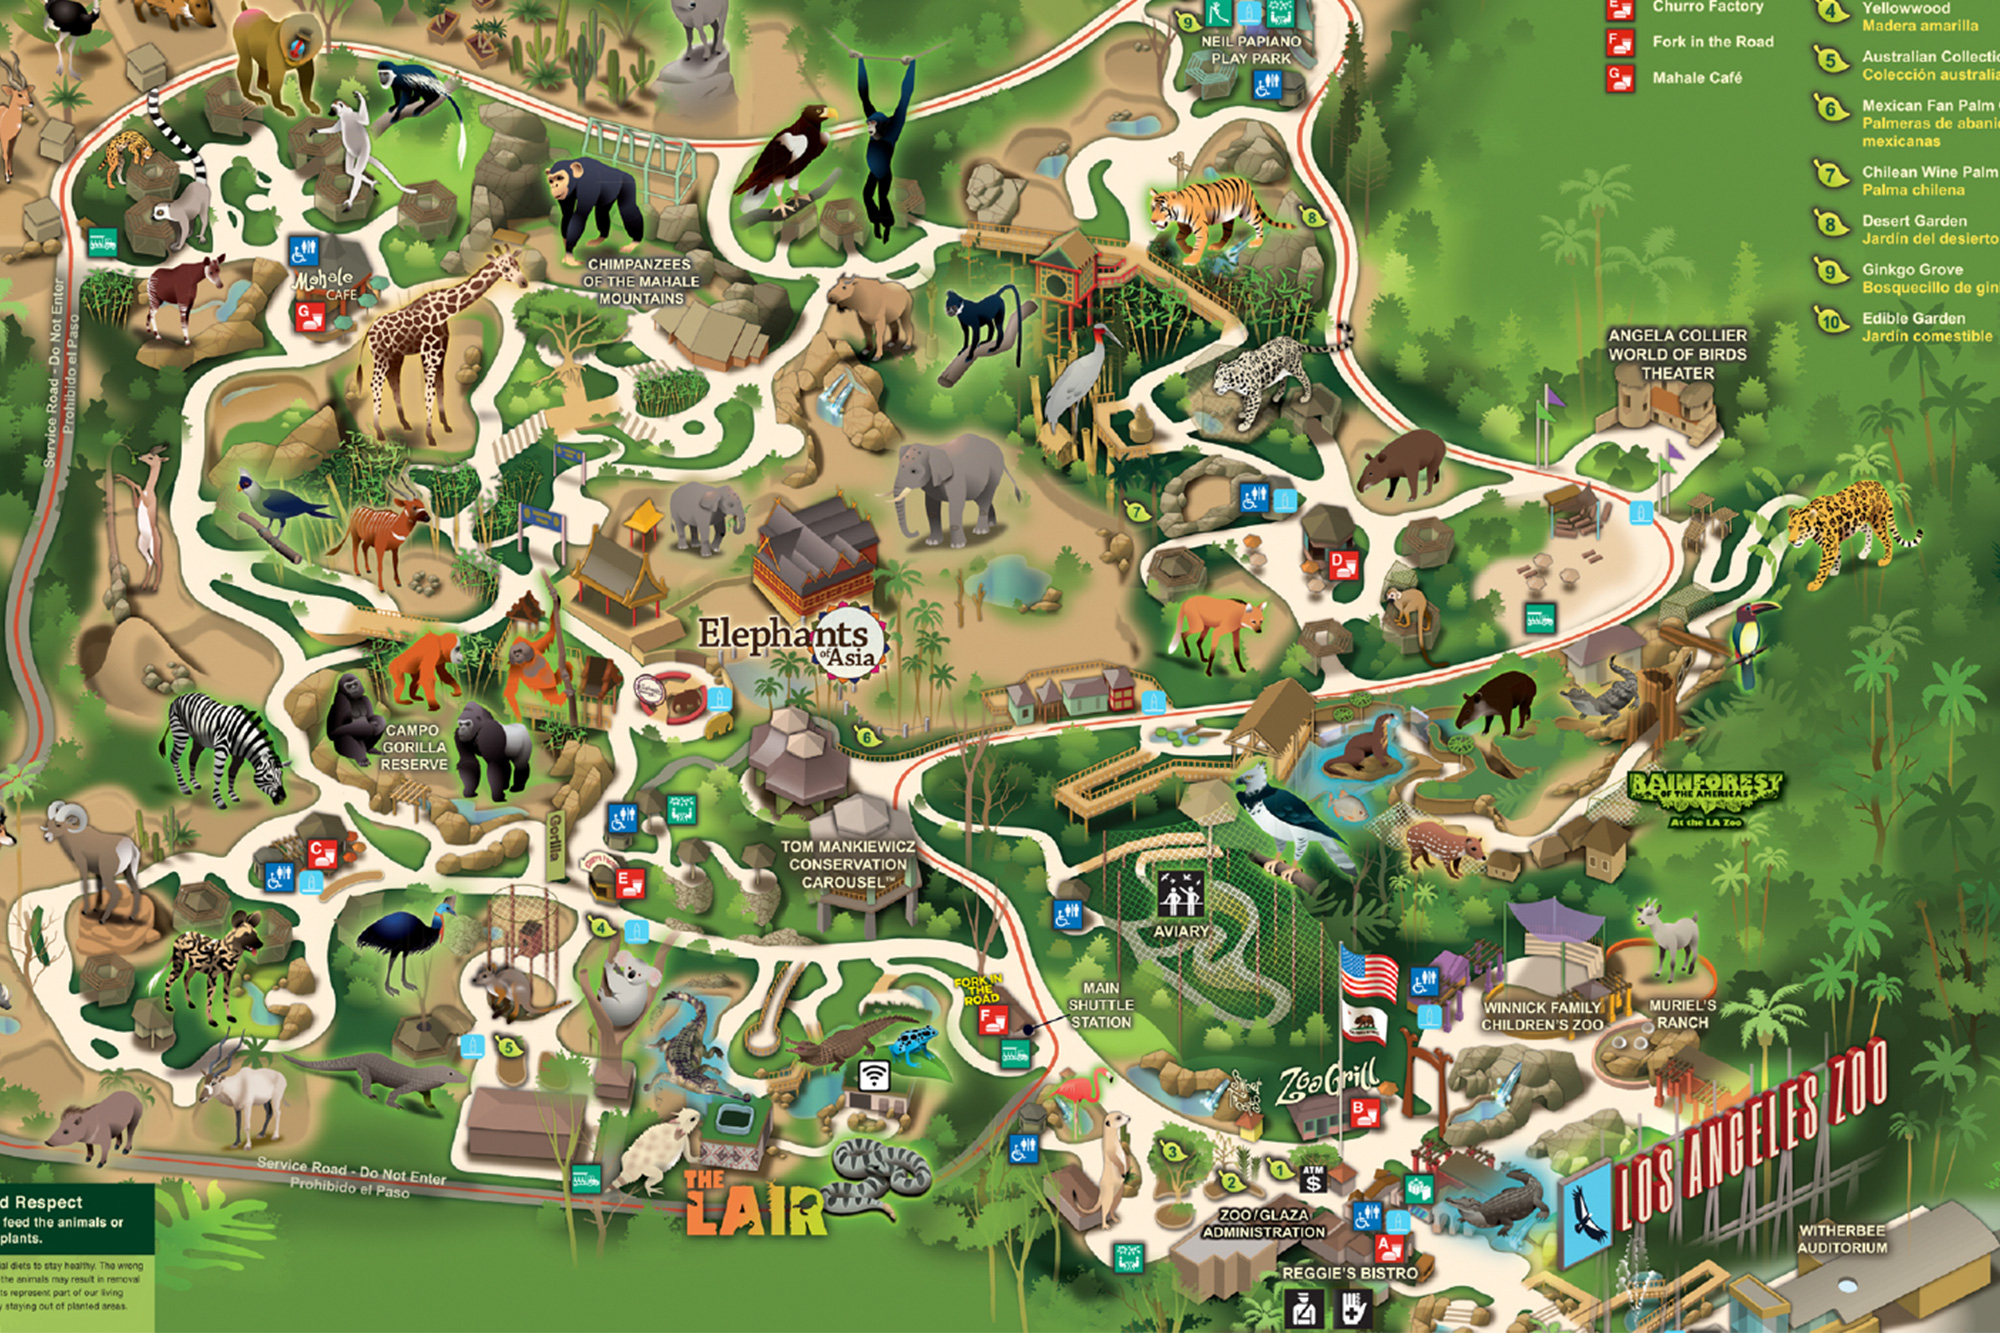 Plan Your Visit Los Angeles Zoo and Botanical Gardens